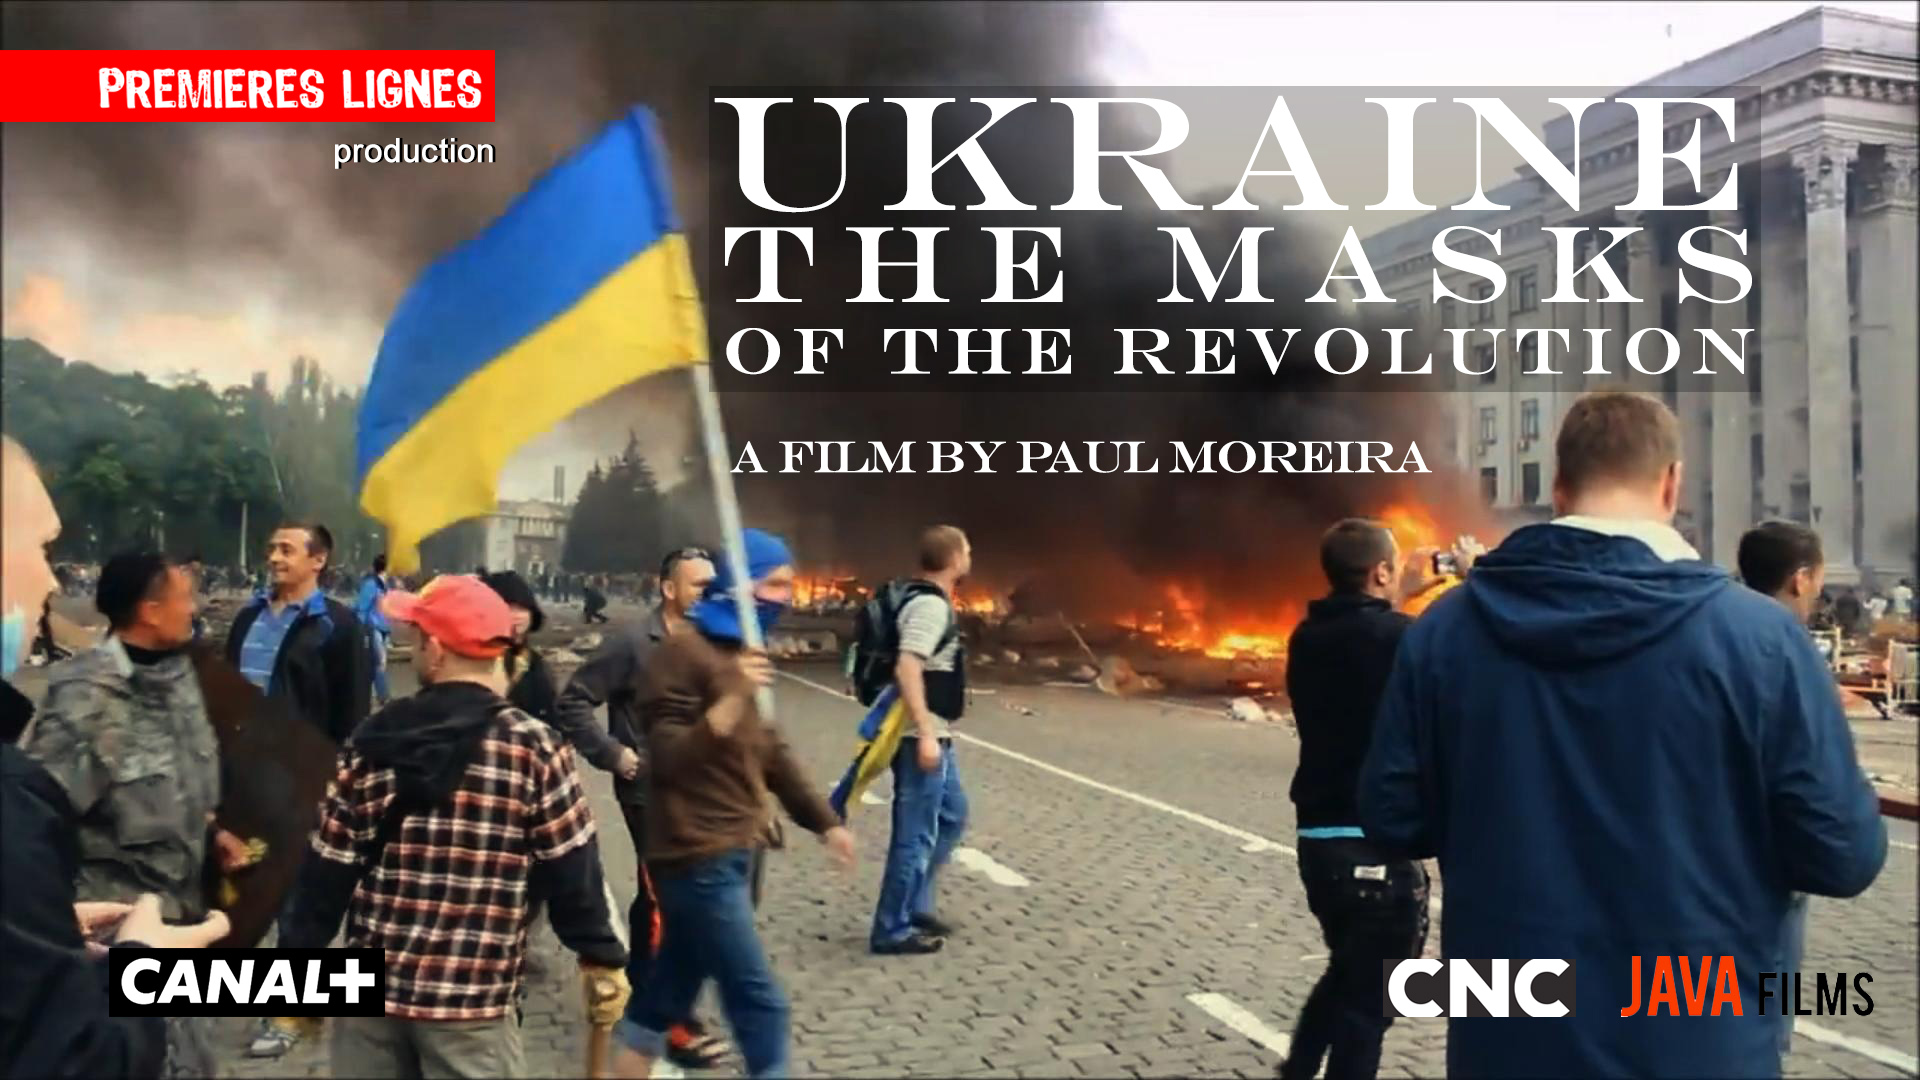 French reporters to film director: “Ukraine – Masks of the Revolution” slanders our vocation